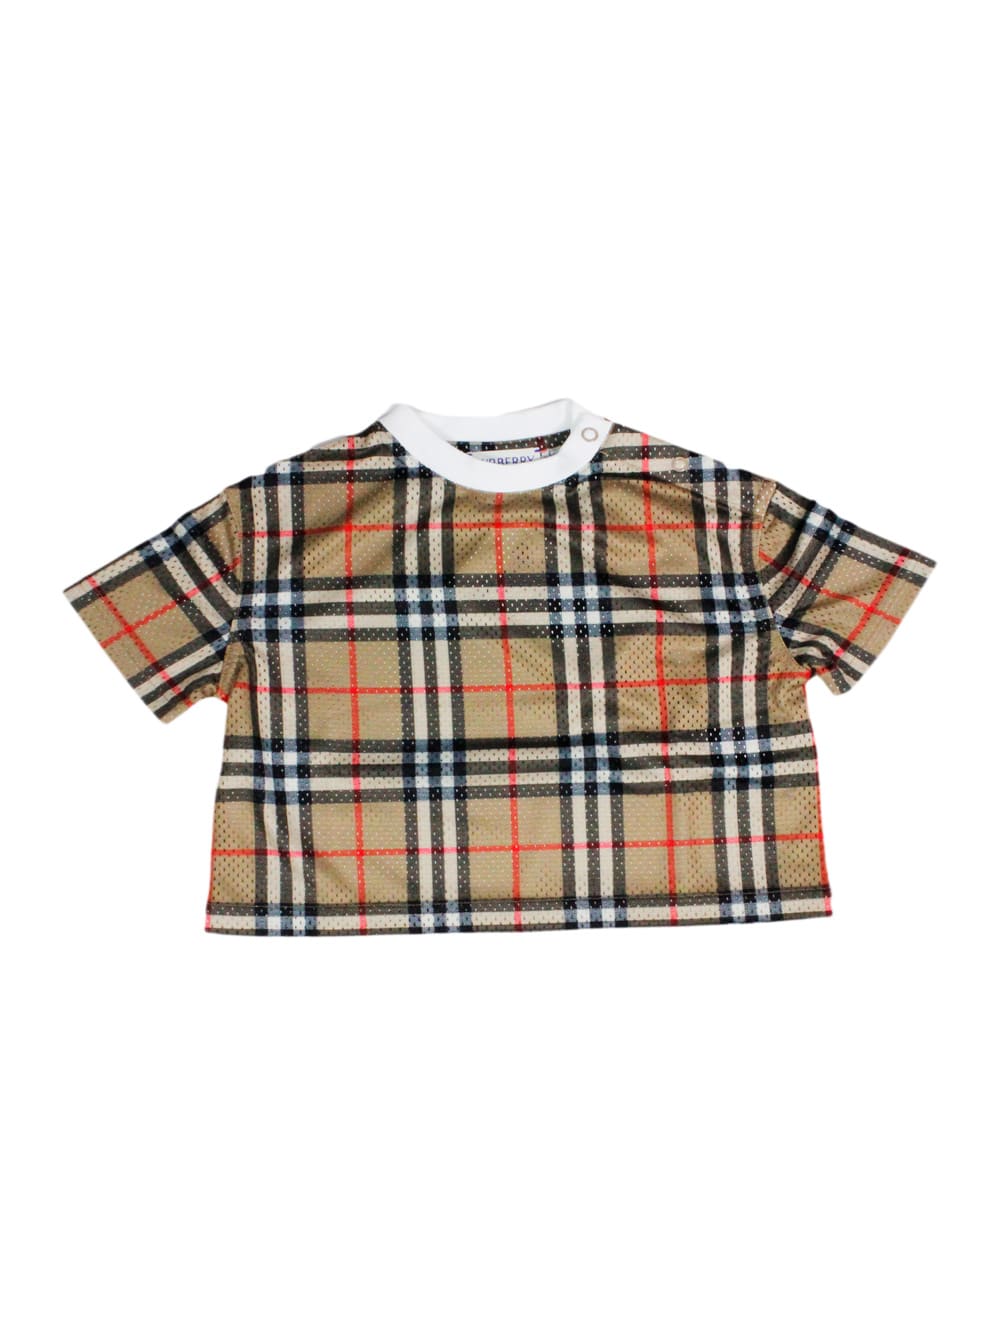 Burberry Crew-neck, Short-sleeved T-shirt In Perforated Fabric With Check Pattern And Small Buttons On The Shoulder.